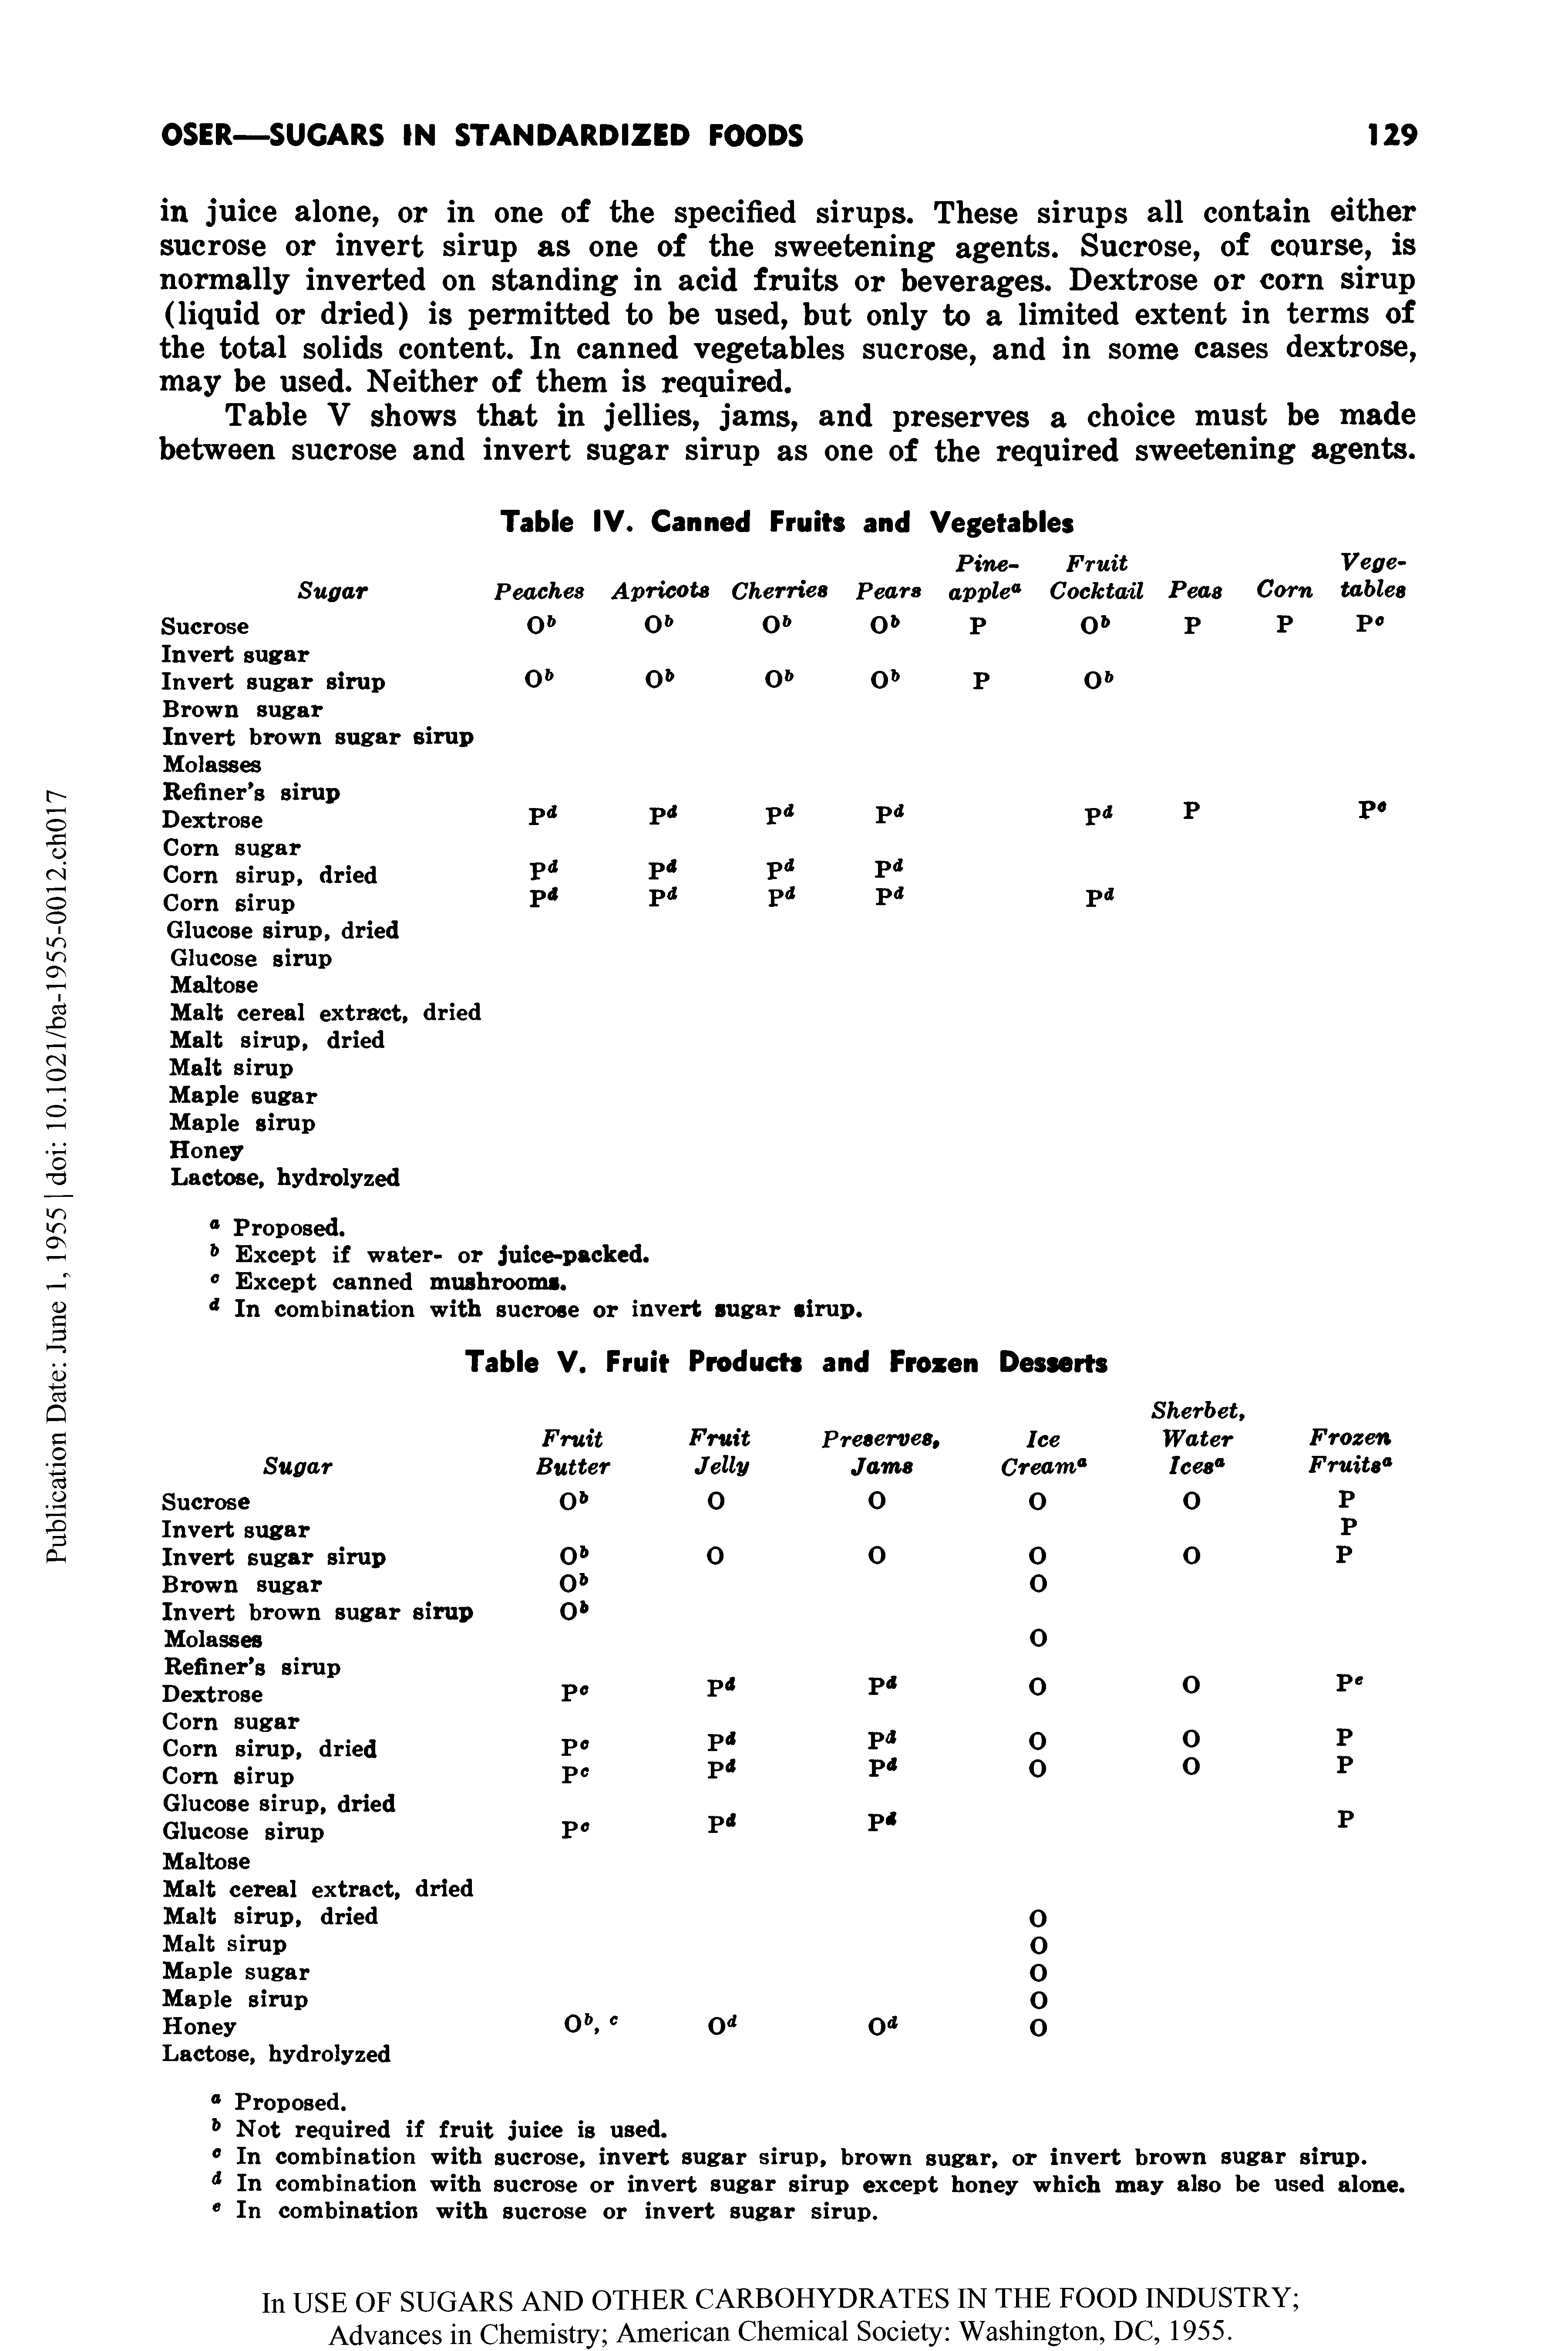 Table V shows that in jellies, jams, and preserves a choice must be made between sucrose and invert sugar sirup as one of the required sweetening agents.